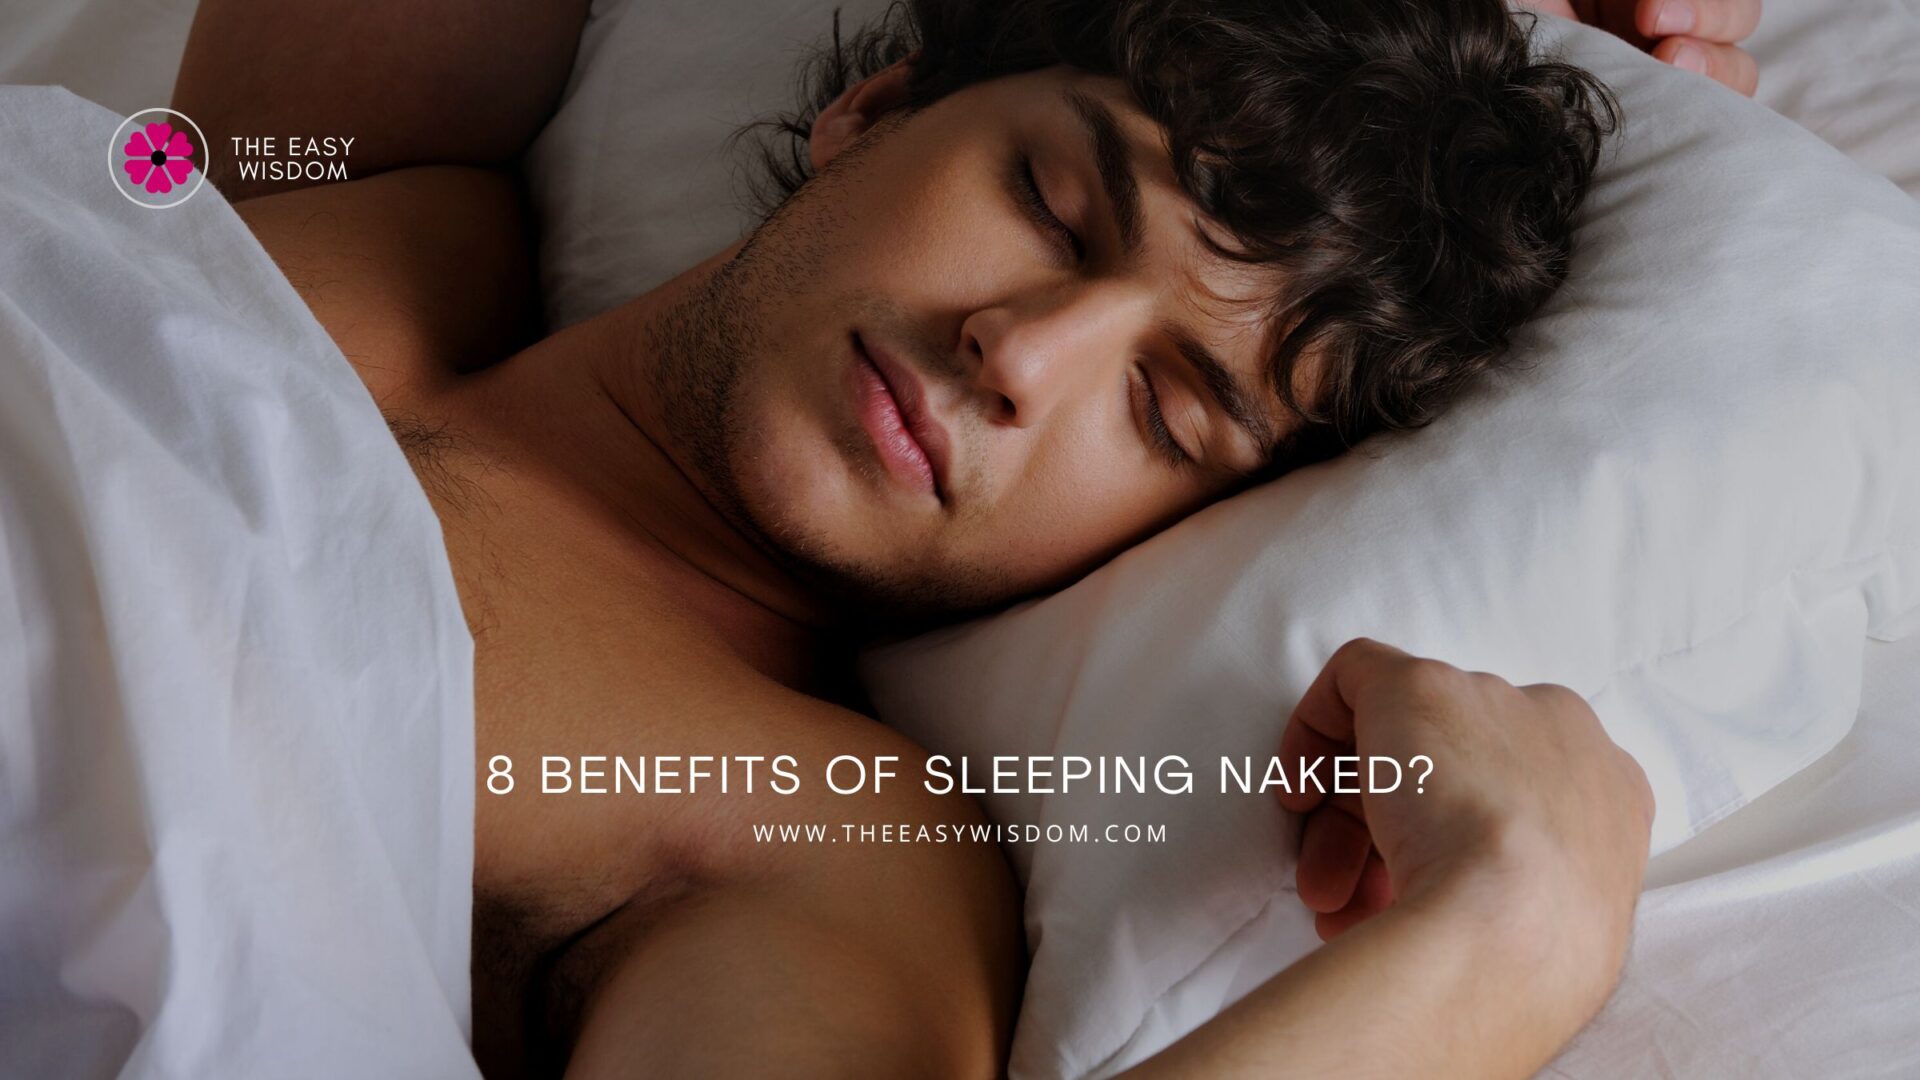 Benefits of Sleeping Naked: Experts Discuss Sleeping Naked for